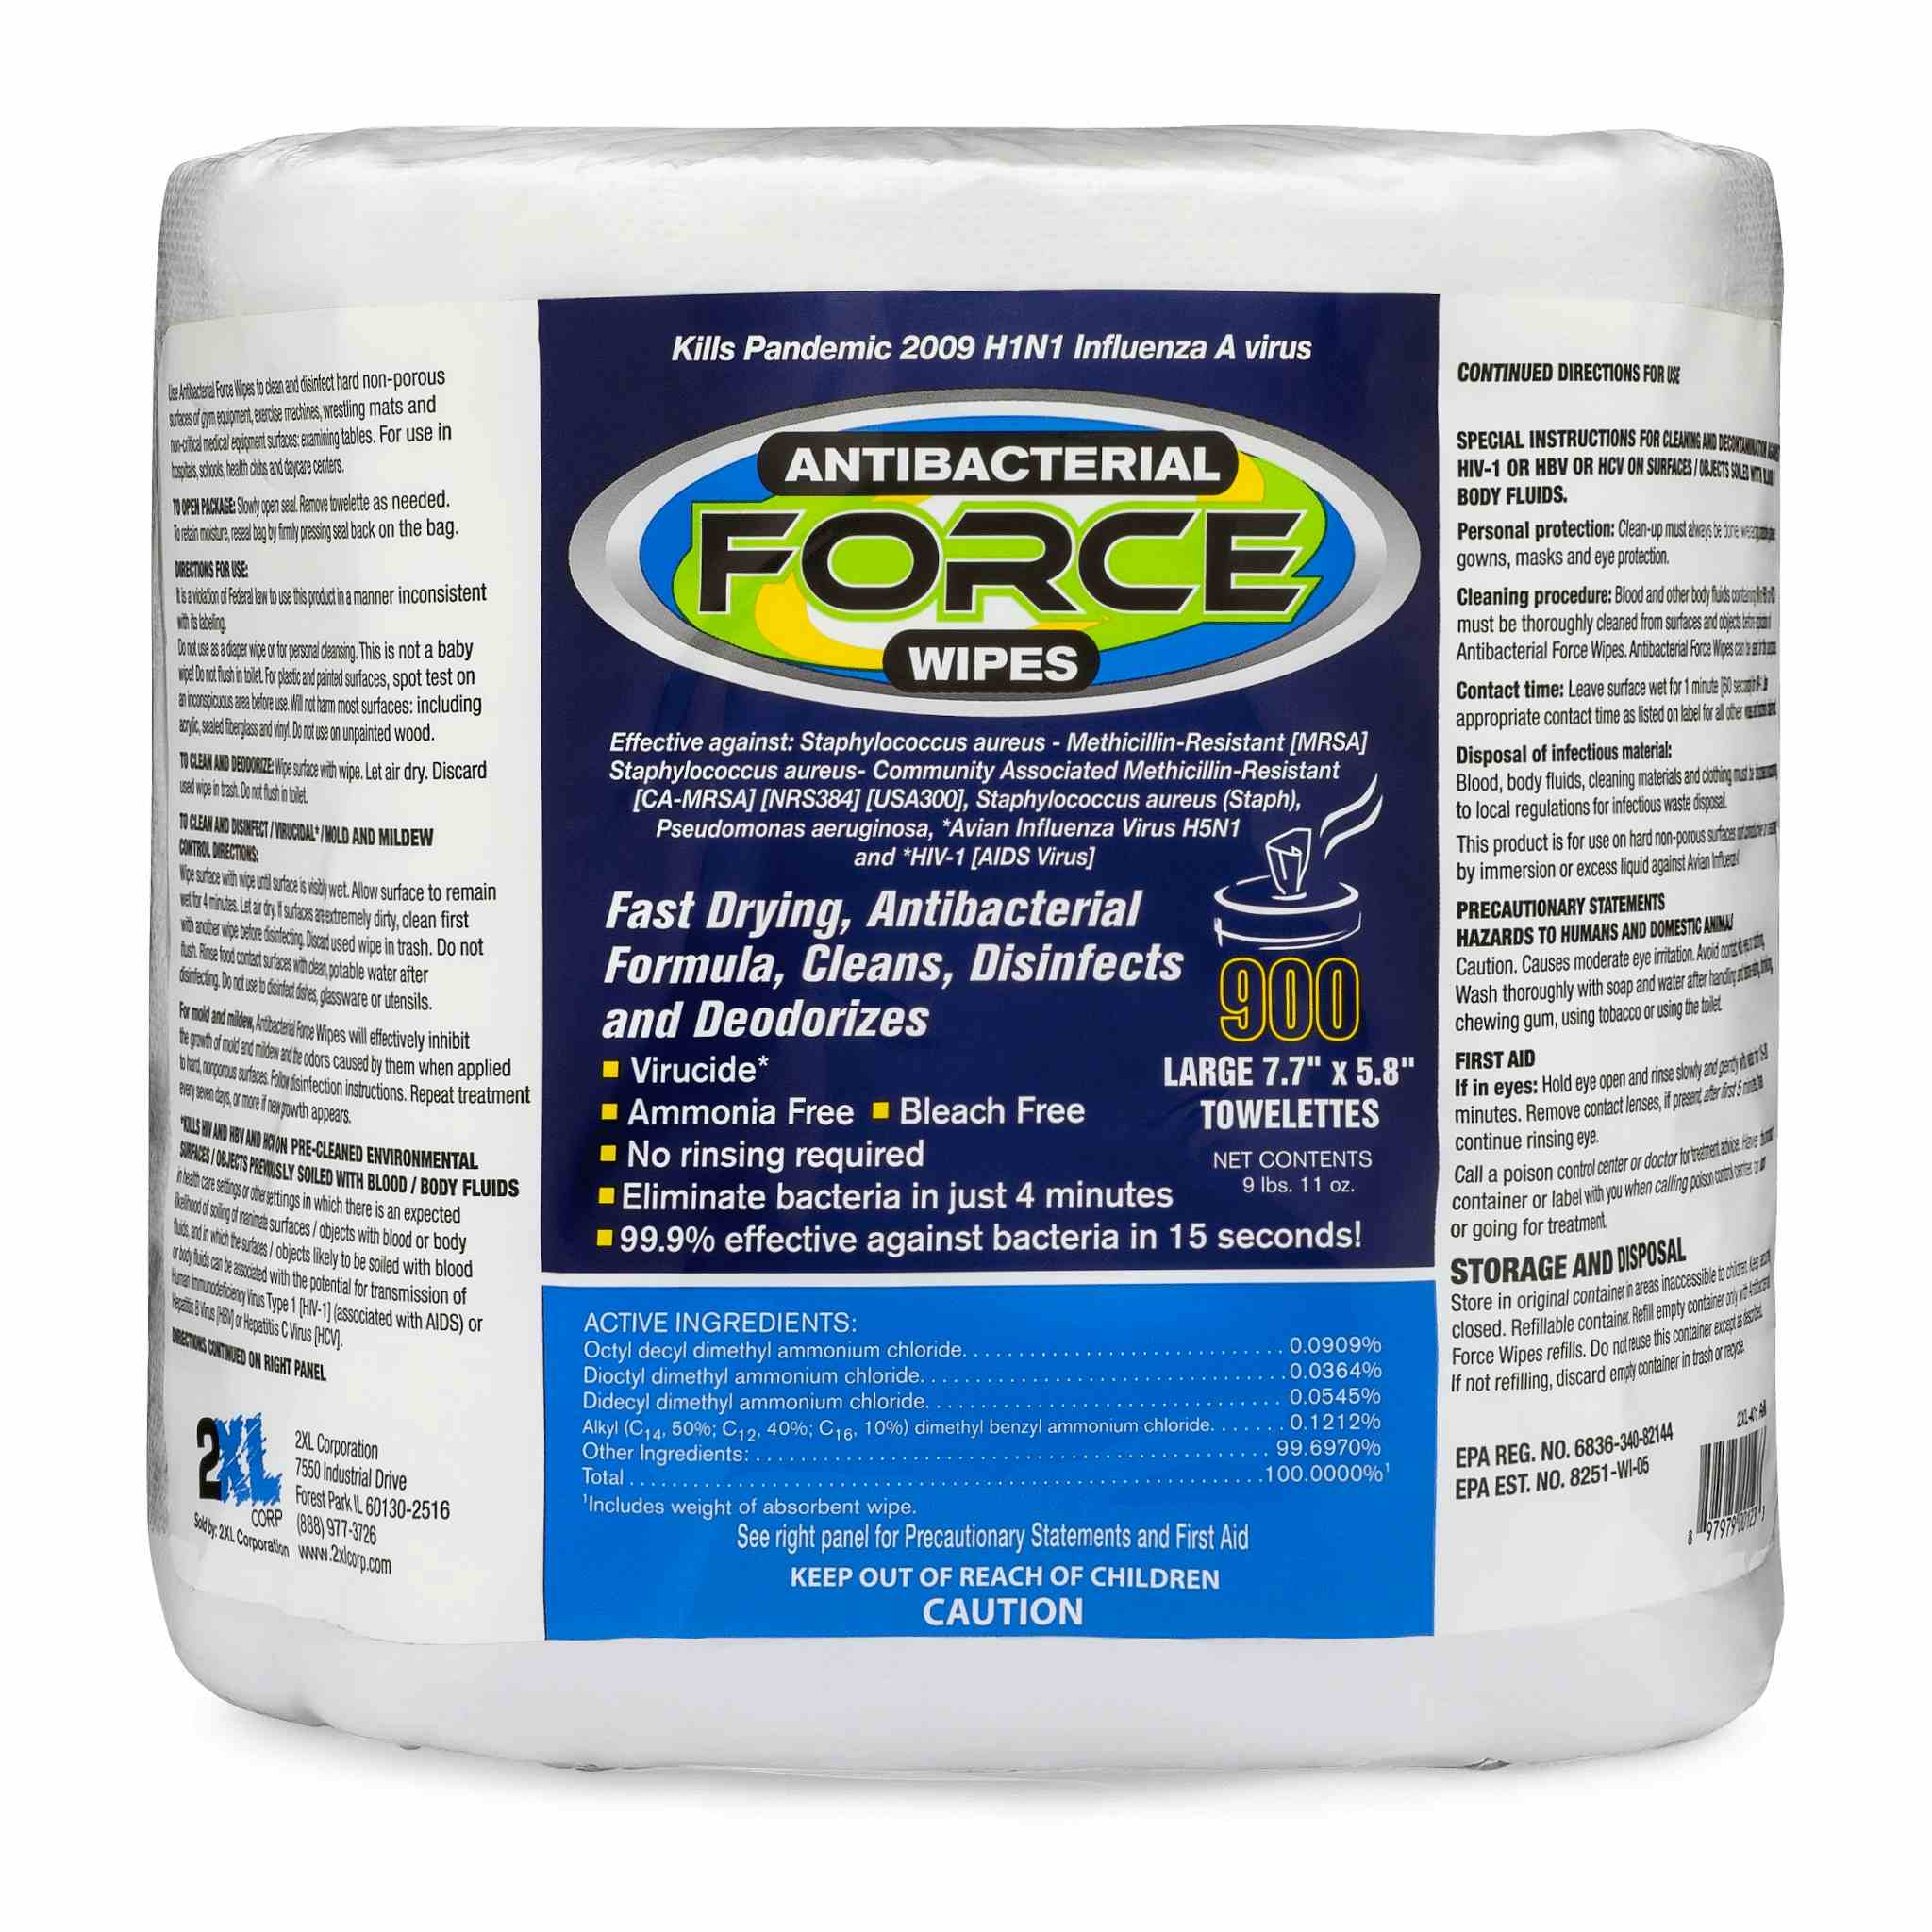 2XL Antibacterial Force Wipes Refill